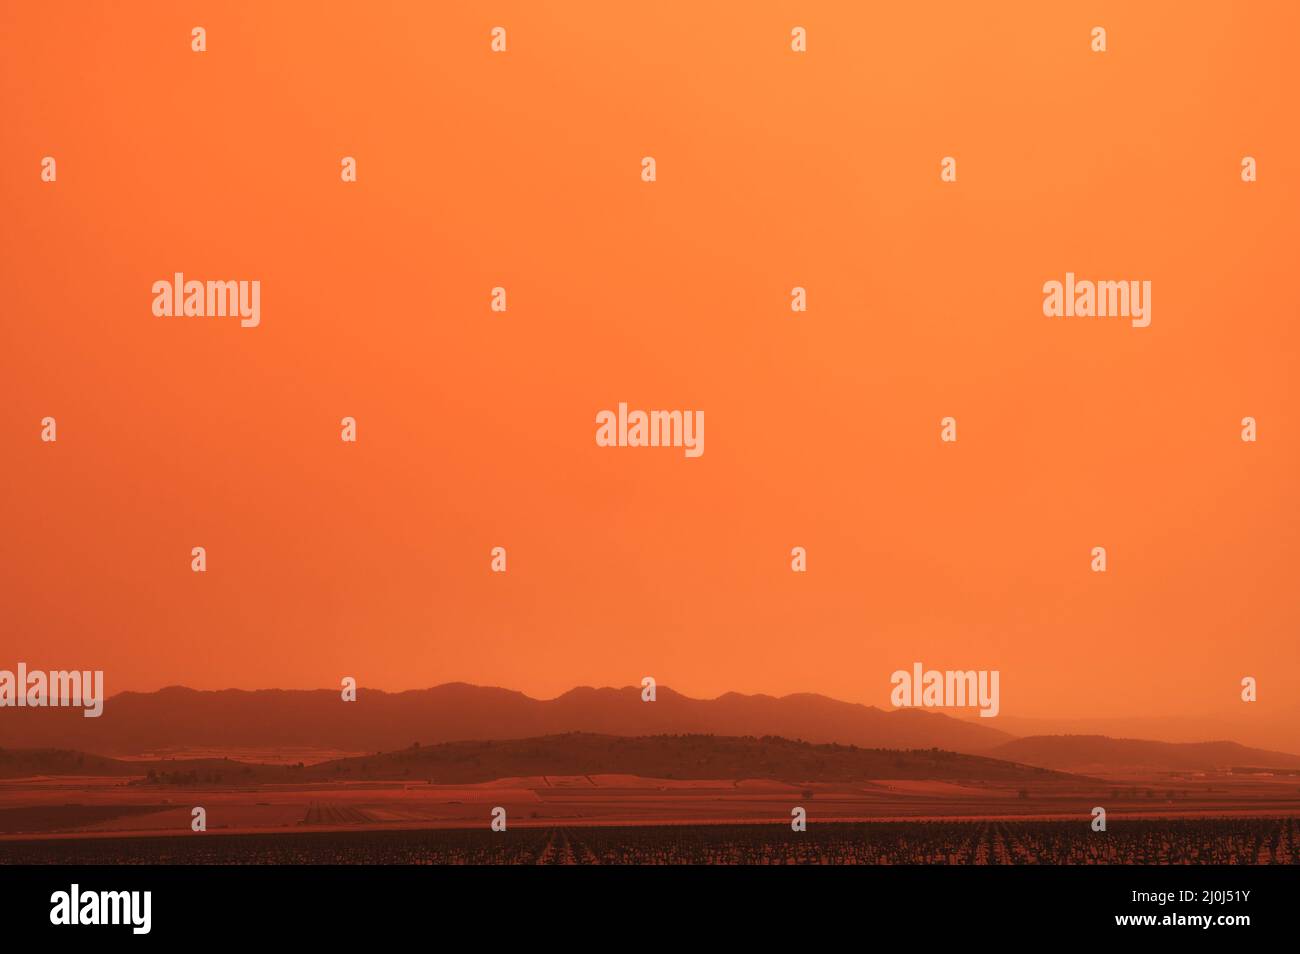 detail of mountains and skies bathed in haze or sahara dust Stock Photo